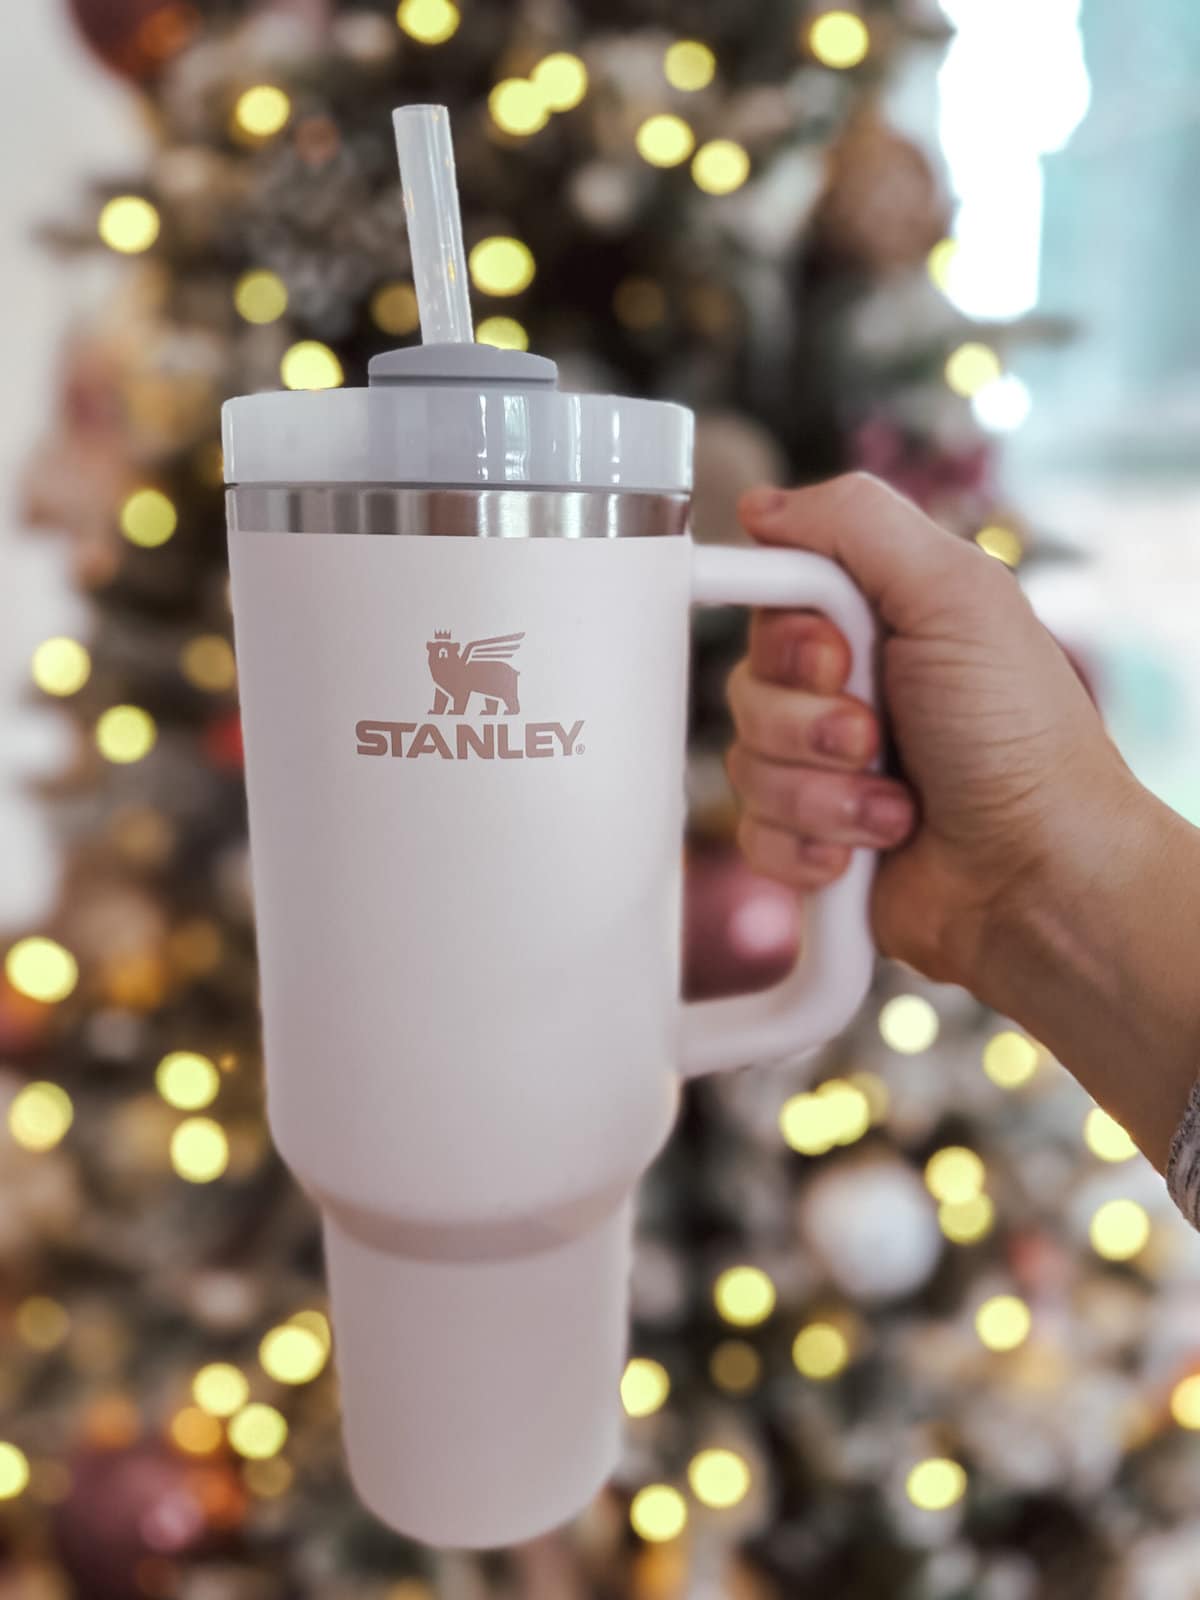 Purchase Wholesale stanley cup accessories. Free Returns & Net 60